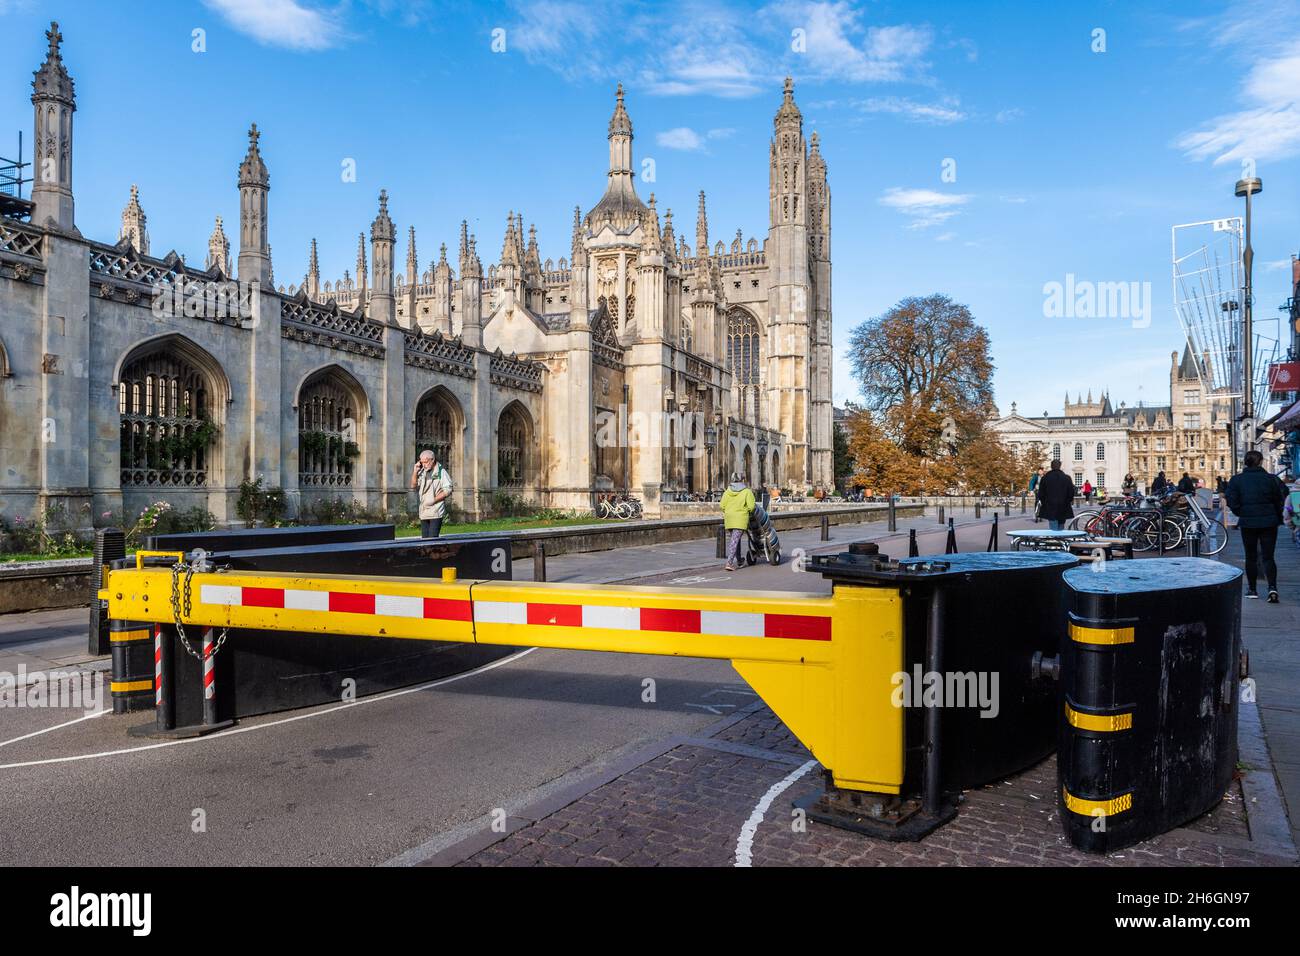 King's College with terroristes Prevention Barriers, Cambridge, Royaume-Uni. Banque D'Images